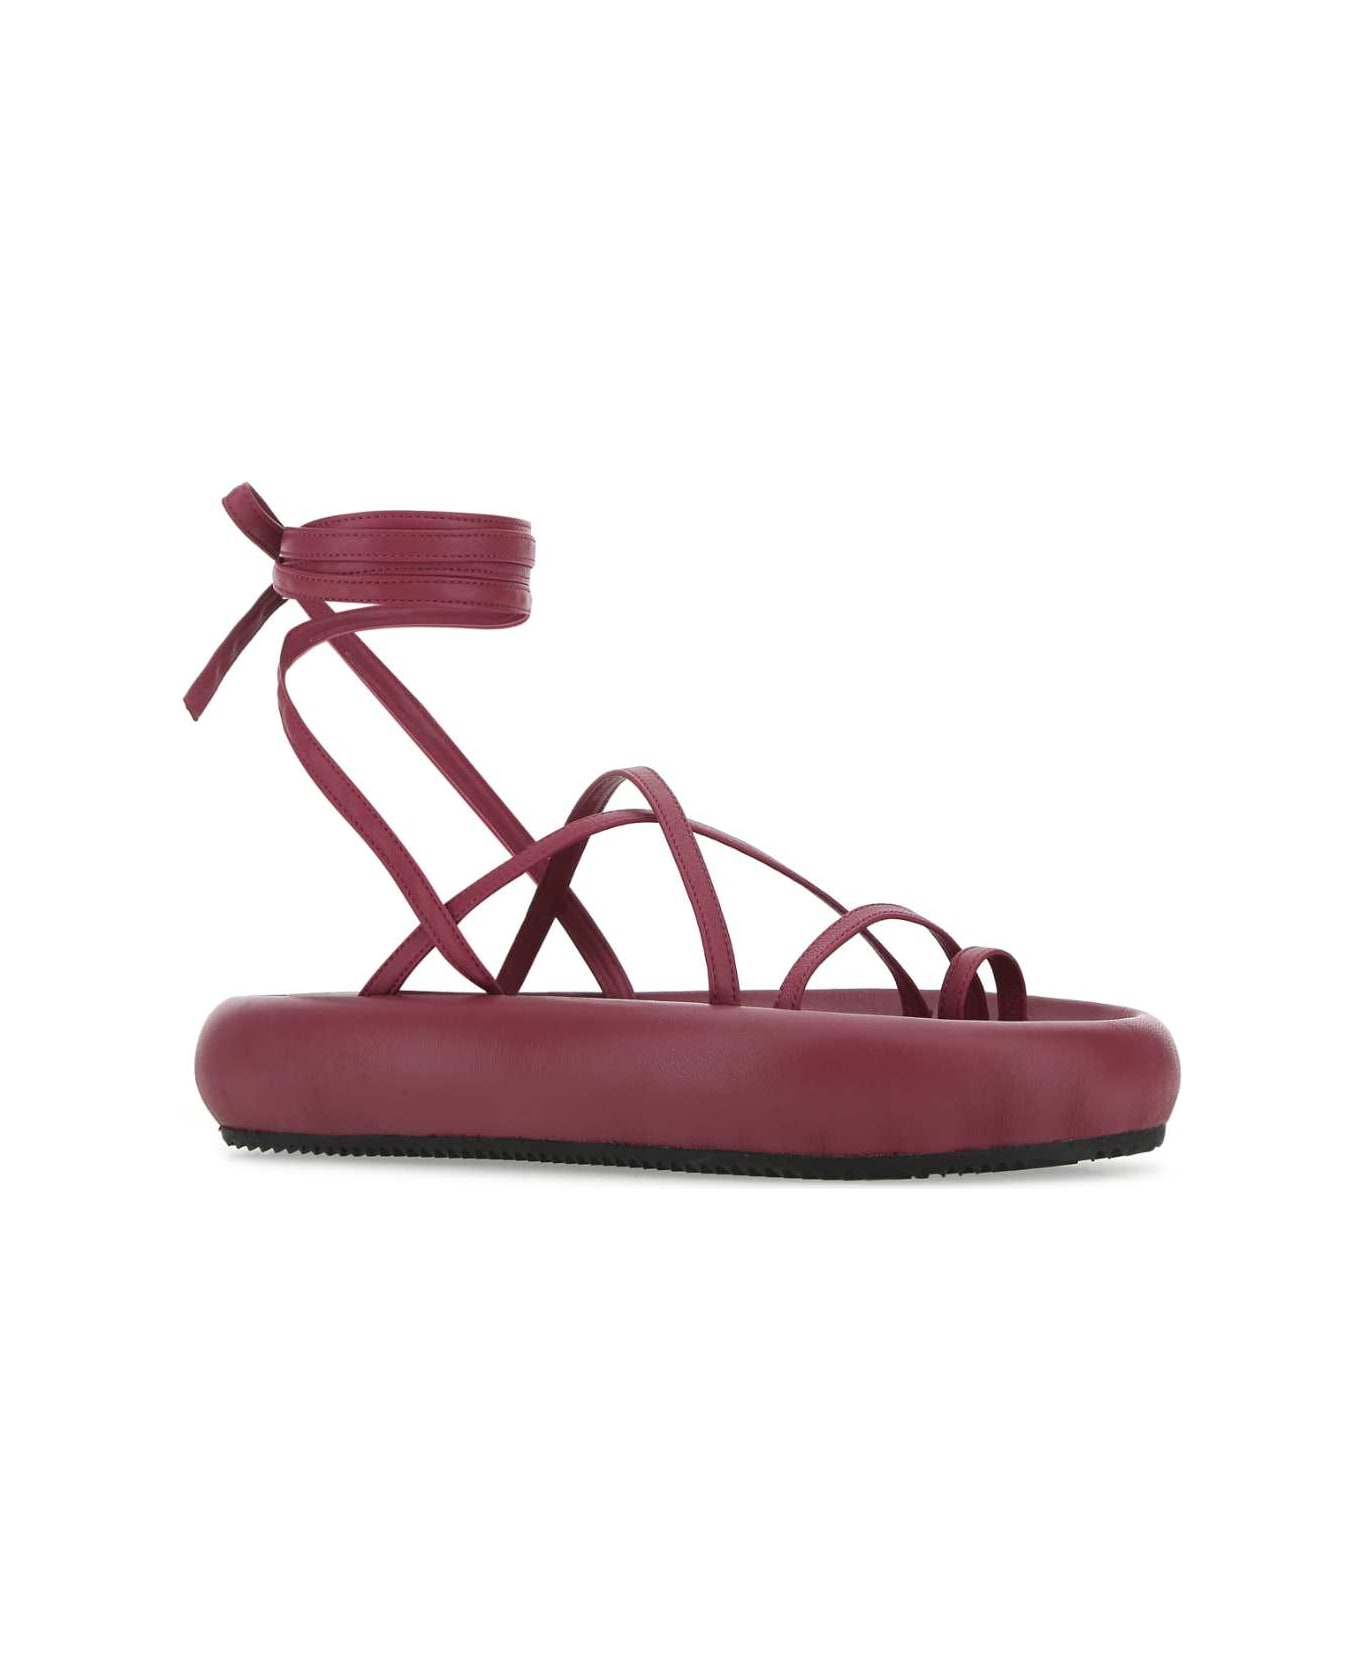 Isabel Marant Tyrian Purple Nappa Leather Soft Puffy Sand Thong Sandals - 40RY